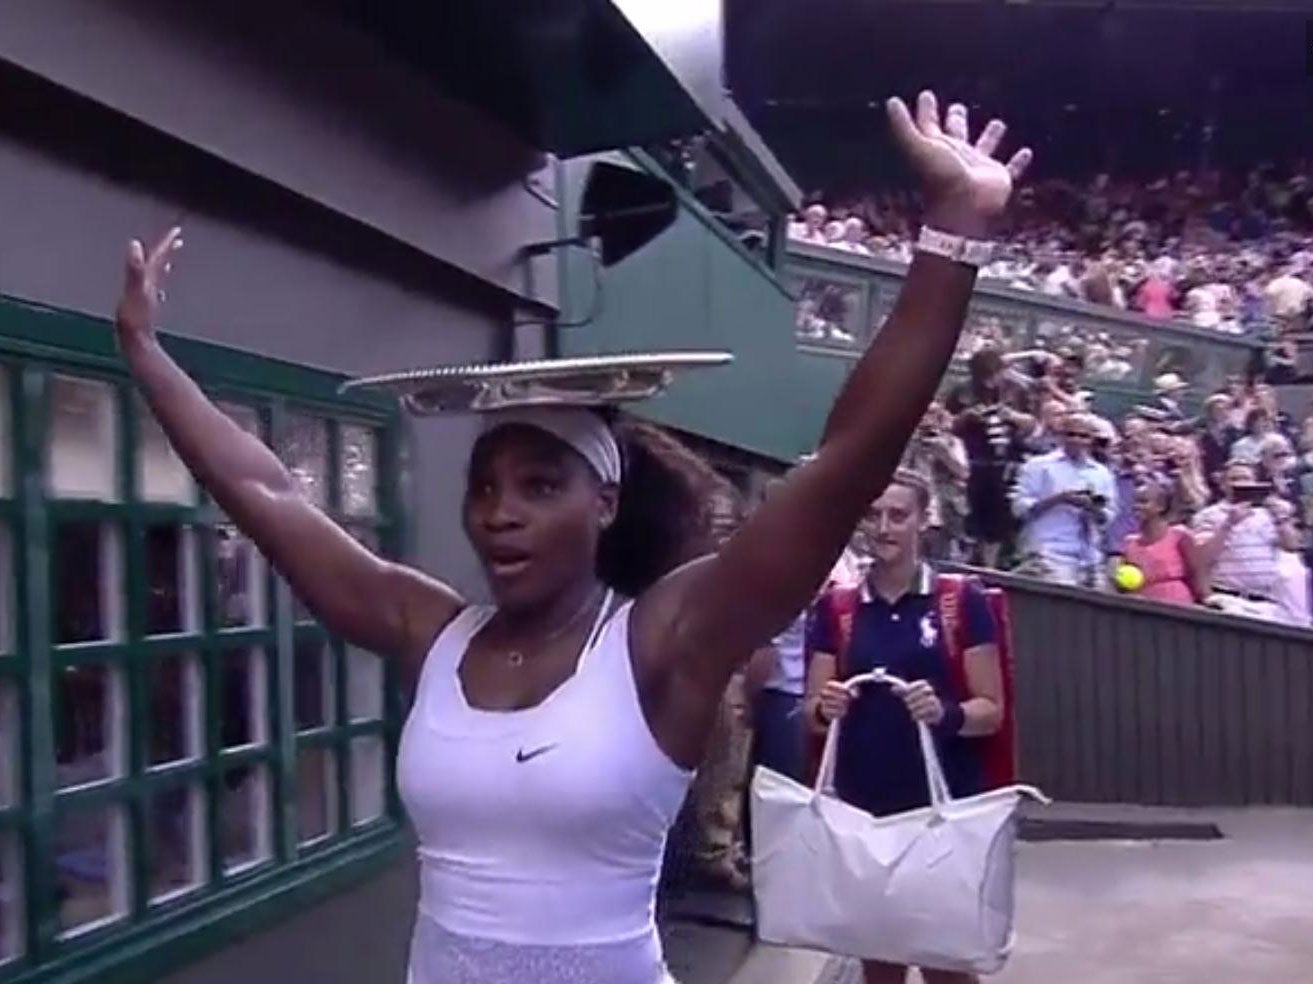 Serena Williams wore her latest trophy as a hat after the 2015 women's singles final at Wimbledon